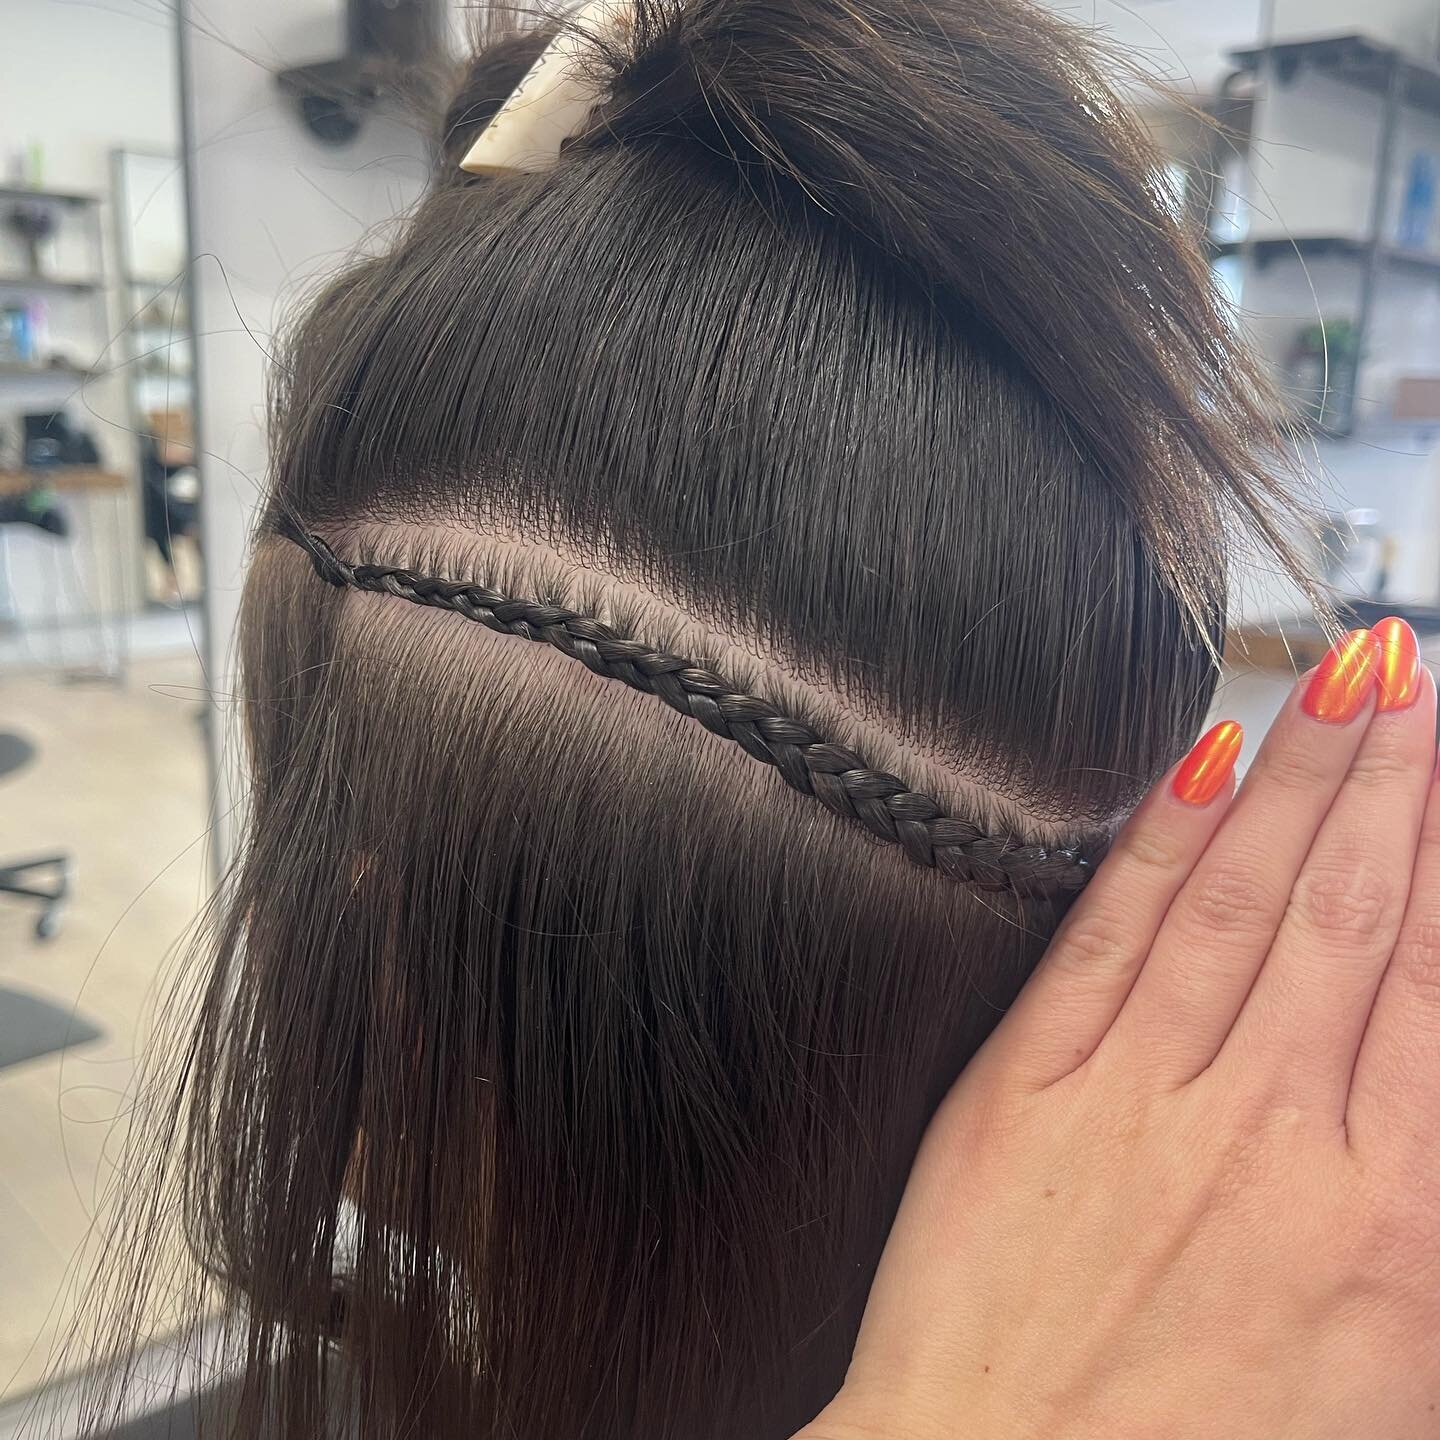 Strong. Solid. Healthy. Clean. Your foundation is EVERYTHING!!!! Our Alumni @anna.m.neun keeps it SOLID and CLEAN!!! Her braids are perfection!!! 😘&hearts;️
#thefoundationbysgreen #thefoundationacademy #sgreenhair #foundationhairextensions #braidedf